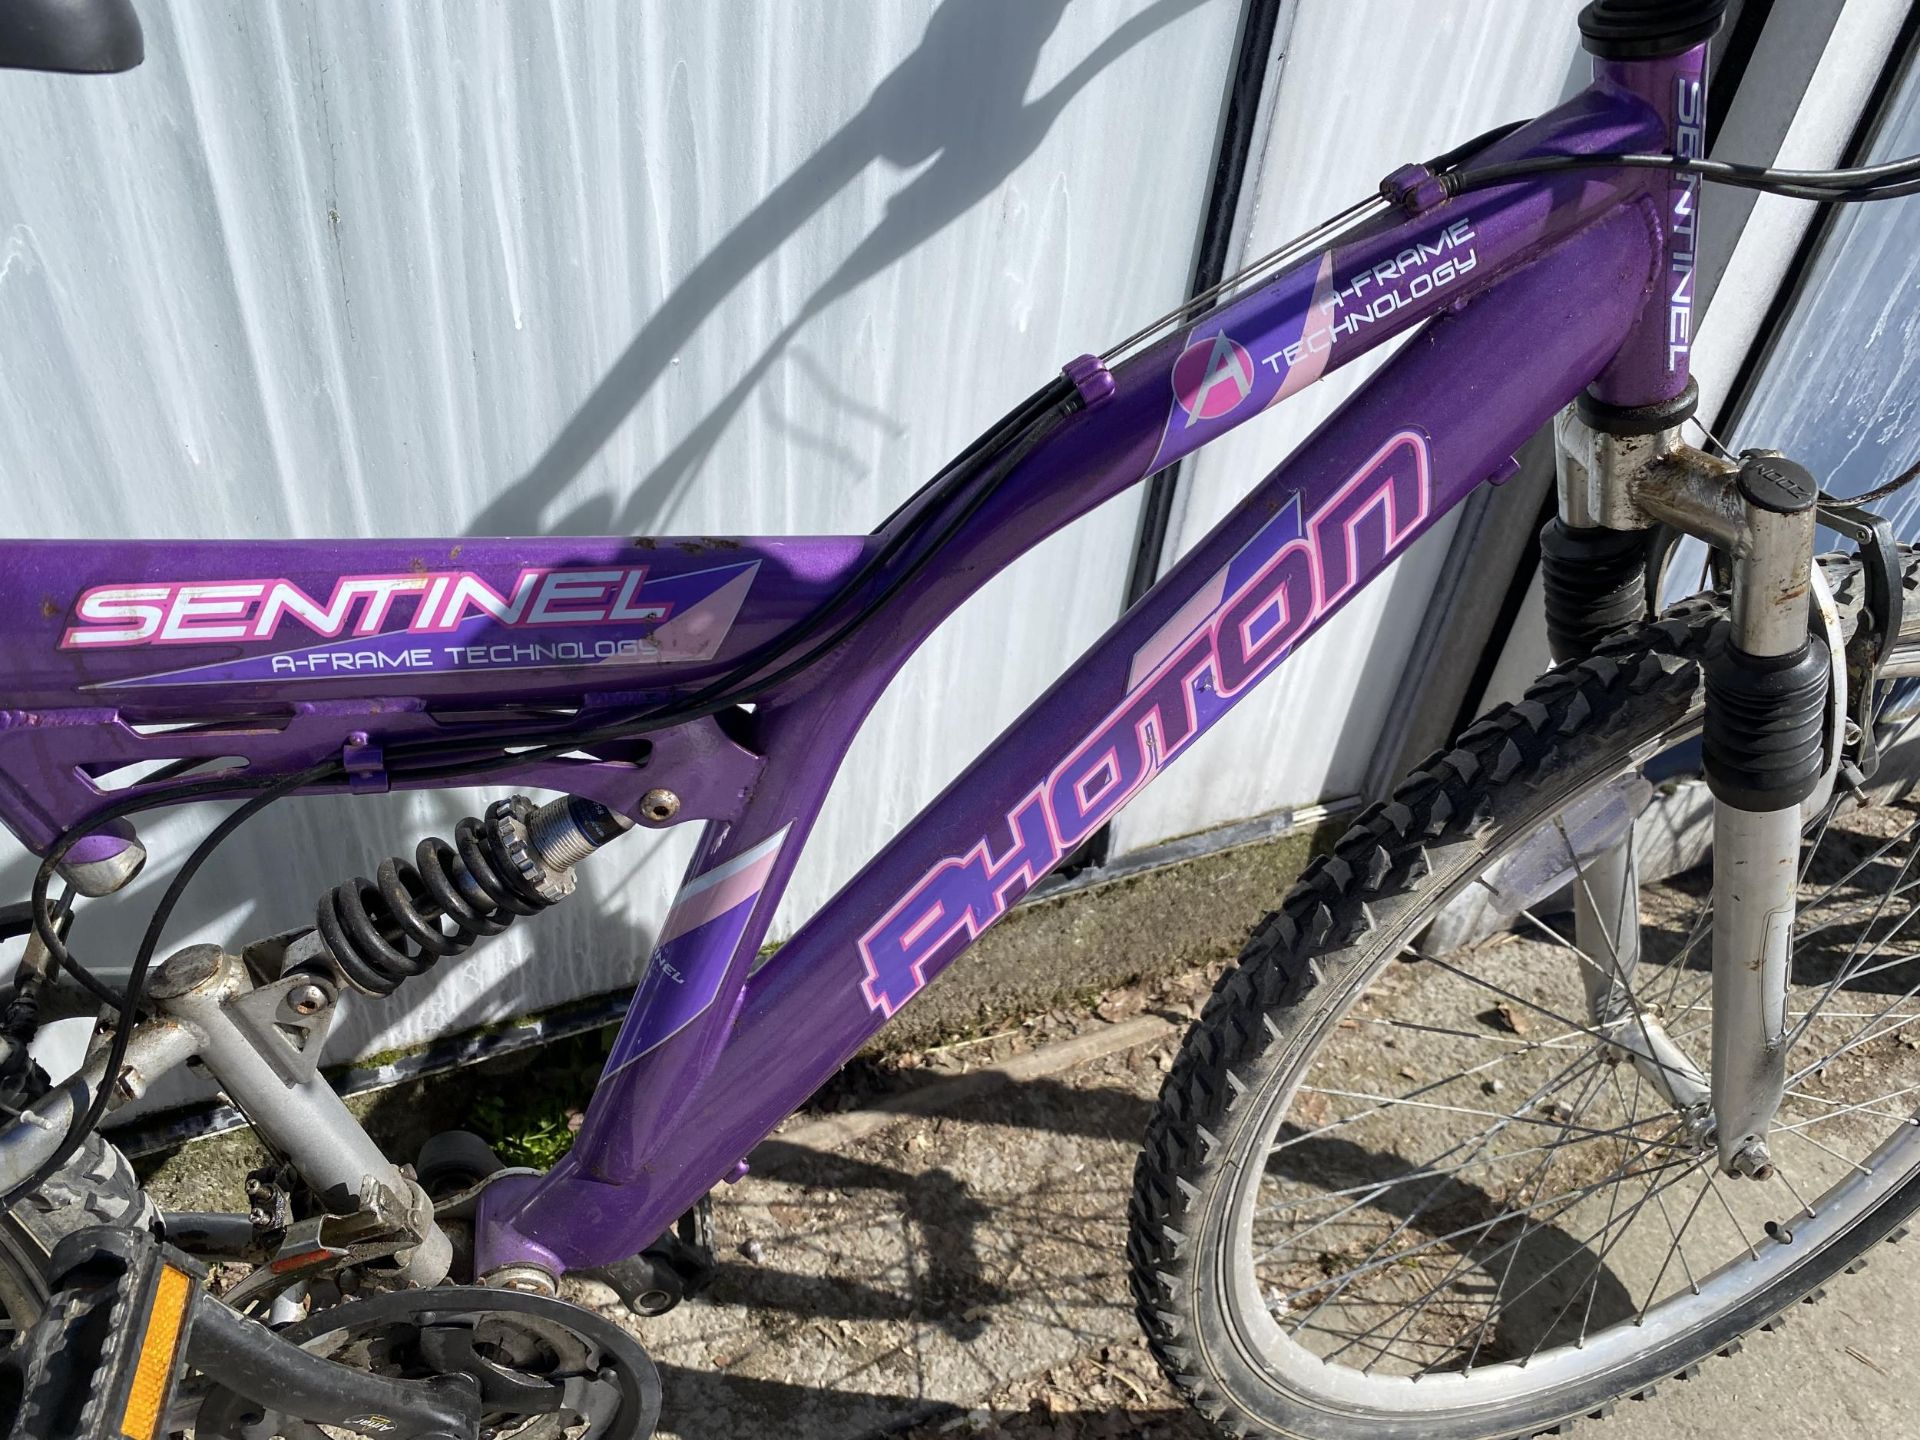 A PHOTON SENTINEL MOUNTAIN BIKE WITH FRONT AND REAR SUSPENSION AND 21 SPEED GEAR SYSTEM - Image 2 of 3